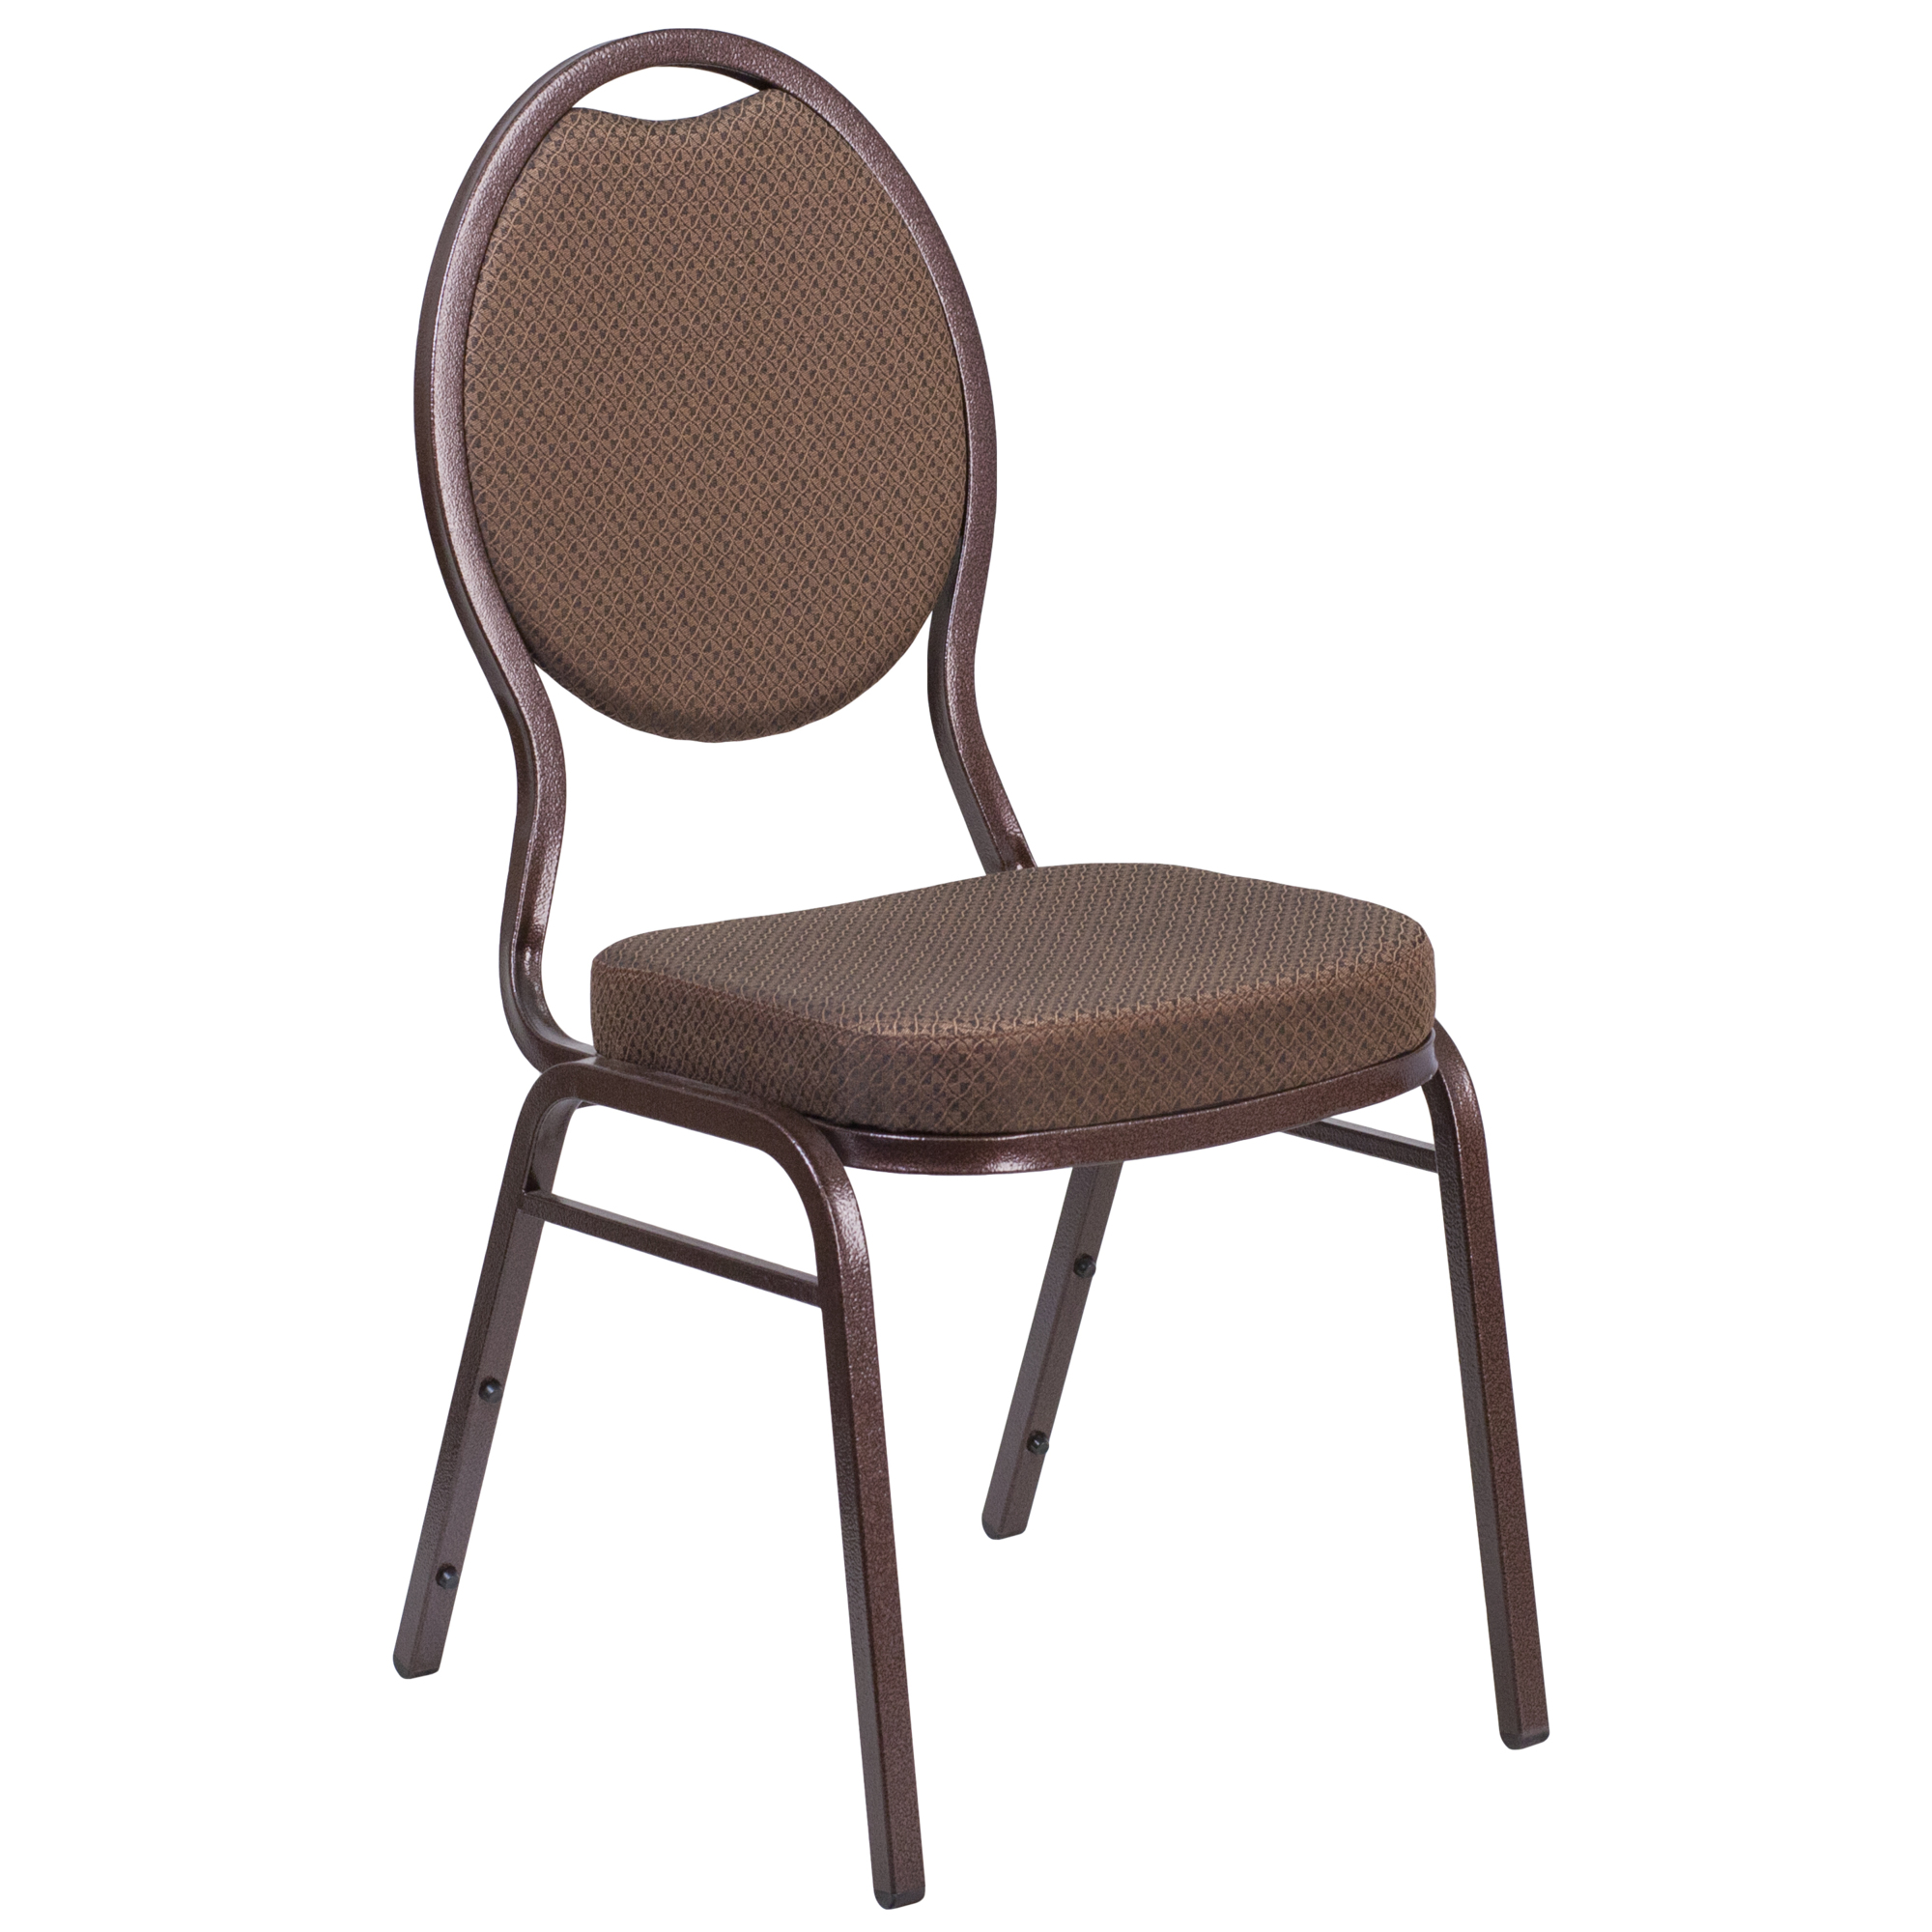 Flash Furniture, Brown Patterned Fabric Stacking Banquet Chair, Primary Color Brown, Included (qty.) 1, Model FDC04CPR08T02